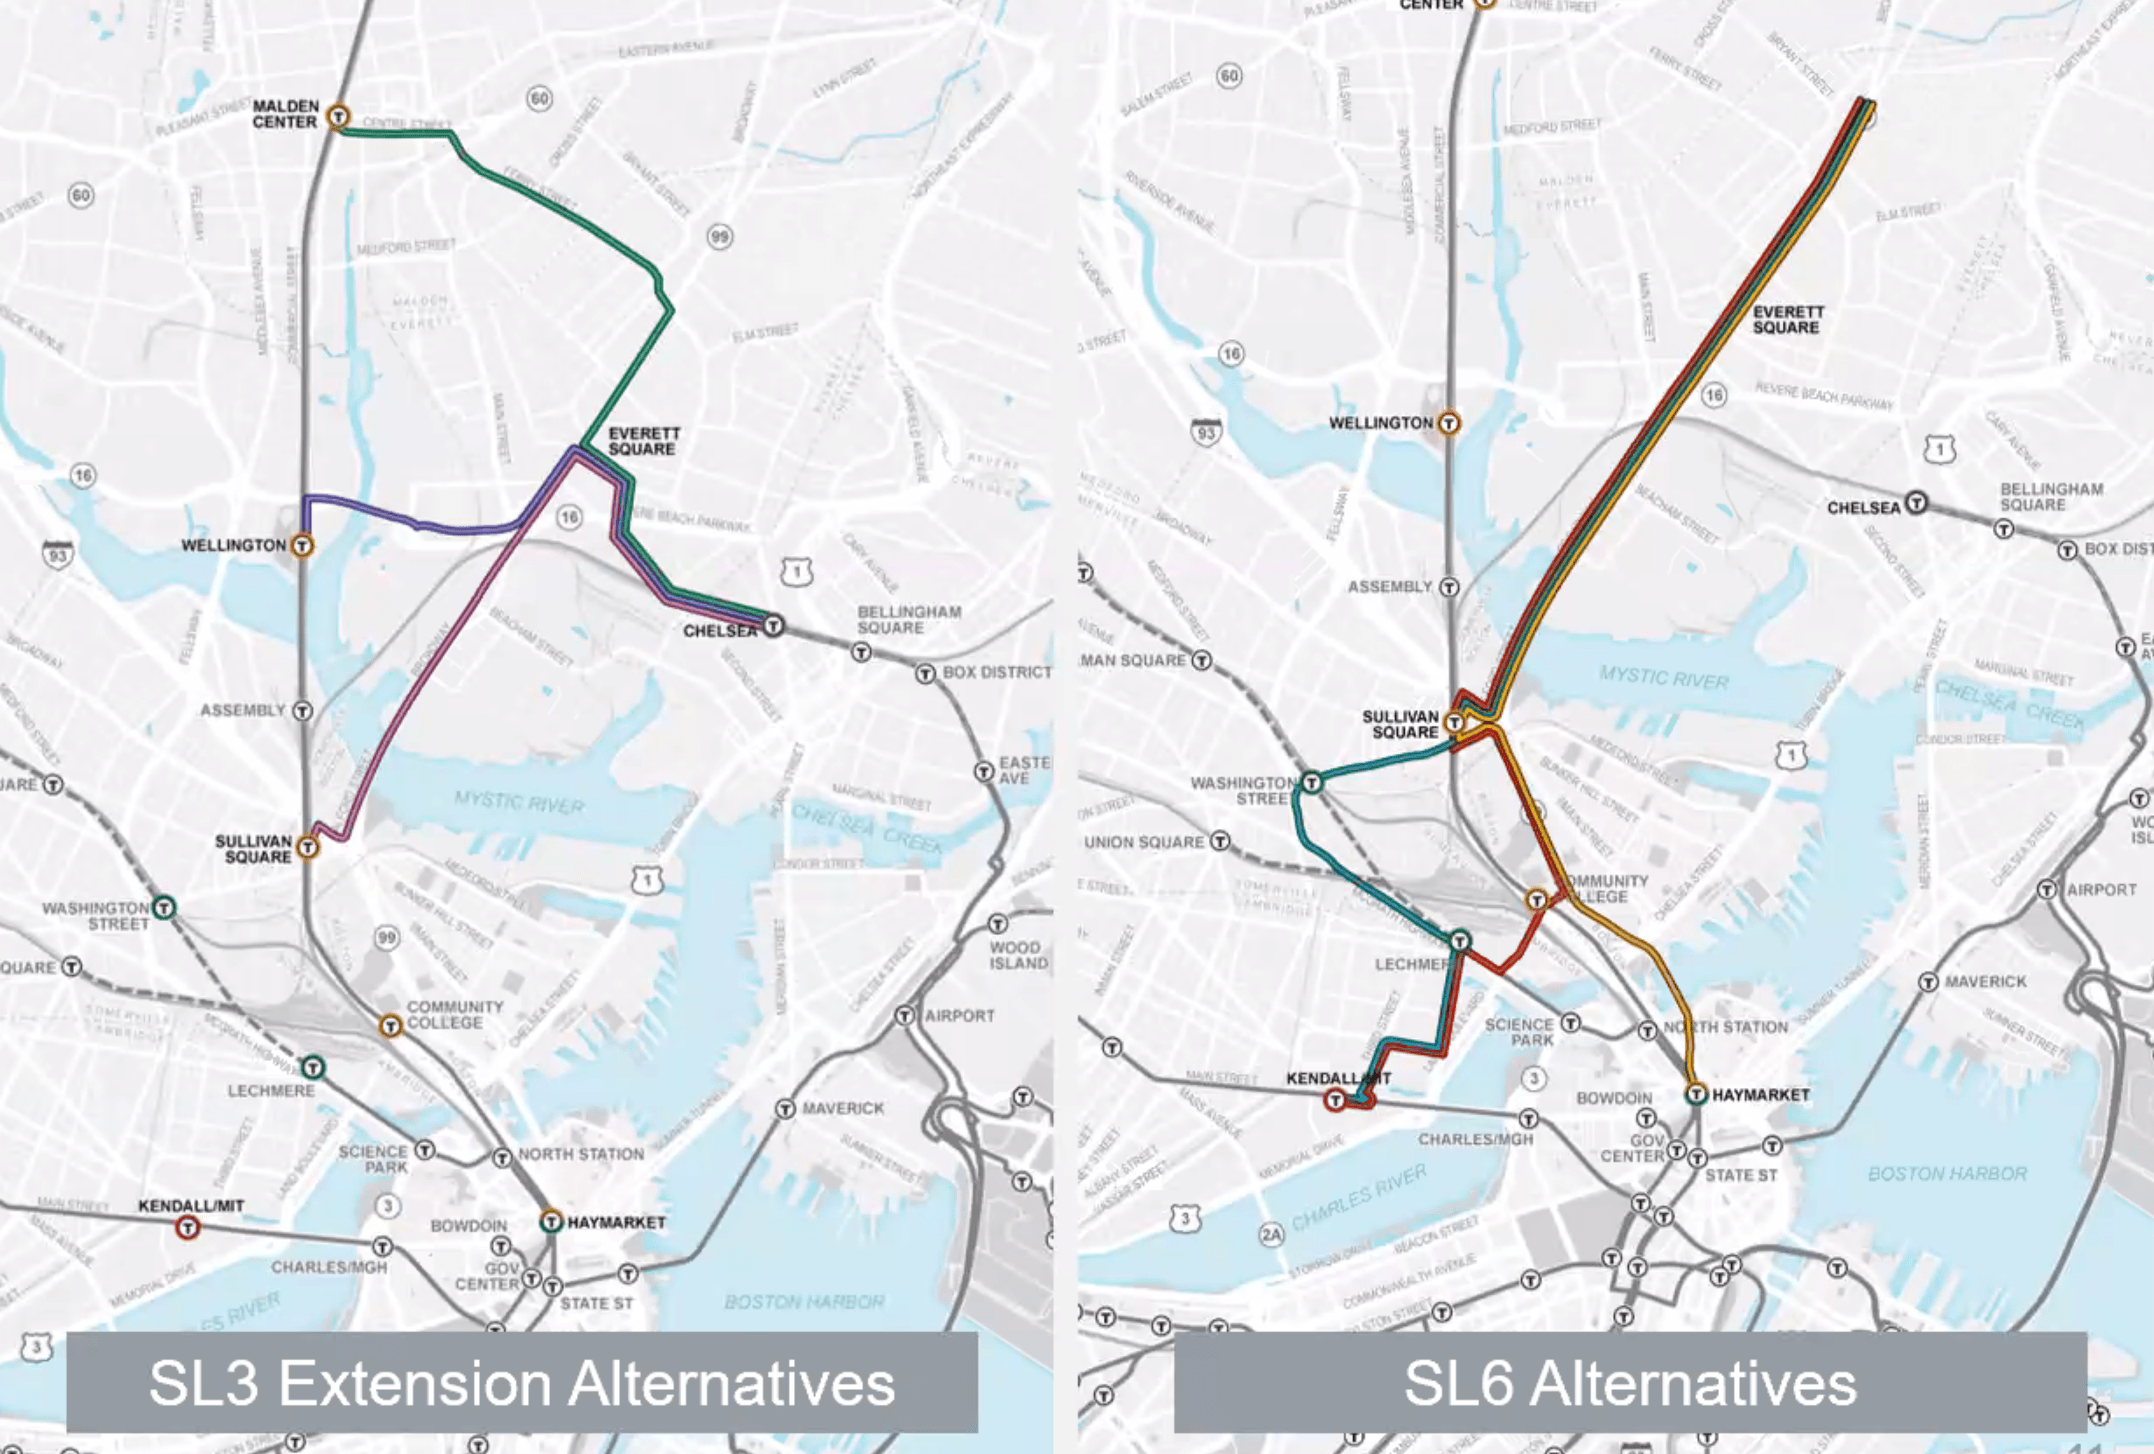 A map of 6 alternatives being analyzed in the MBTA's Silver Line Extension study. On the left, three route options would be extensions of the existing SL3 route , which currently terminates in Chelsea; three other options (right) would be a new Silver Line route - tentatively named "SL6" - from Everett to Kendall Square or downtown Boston.